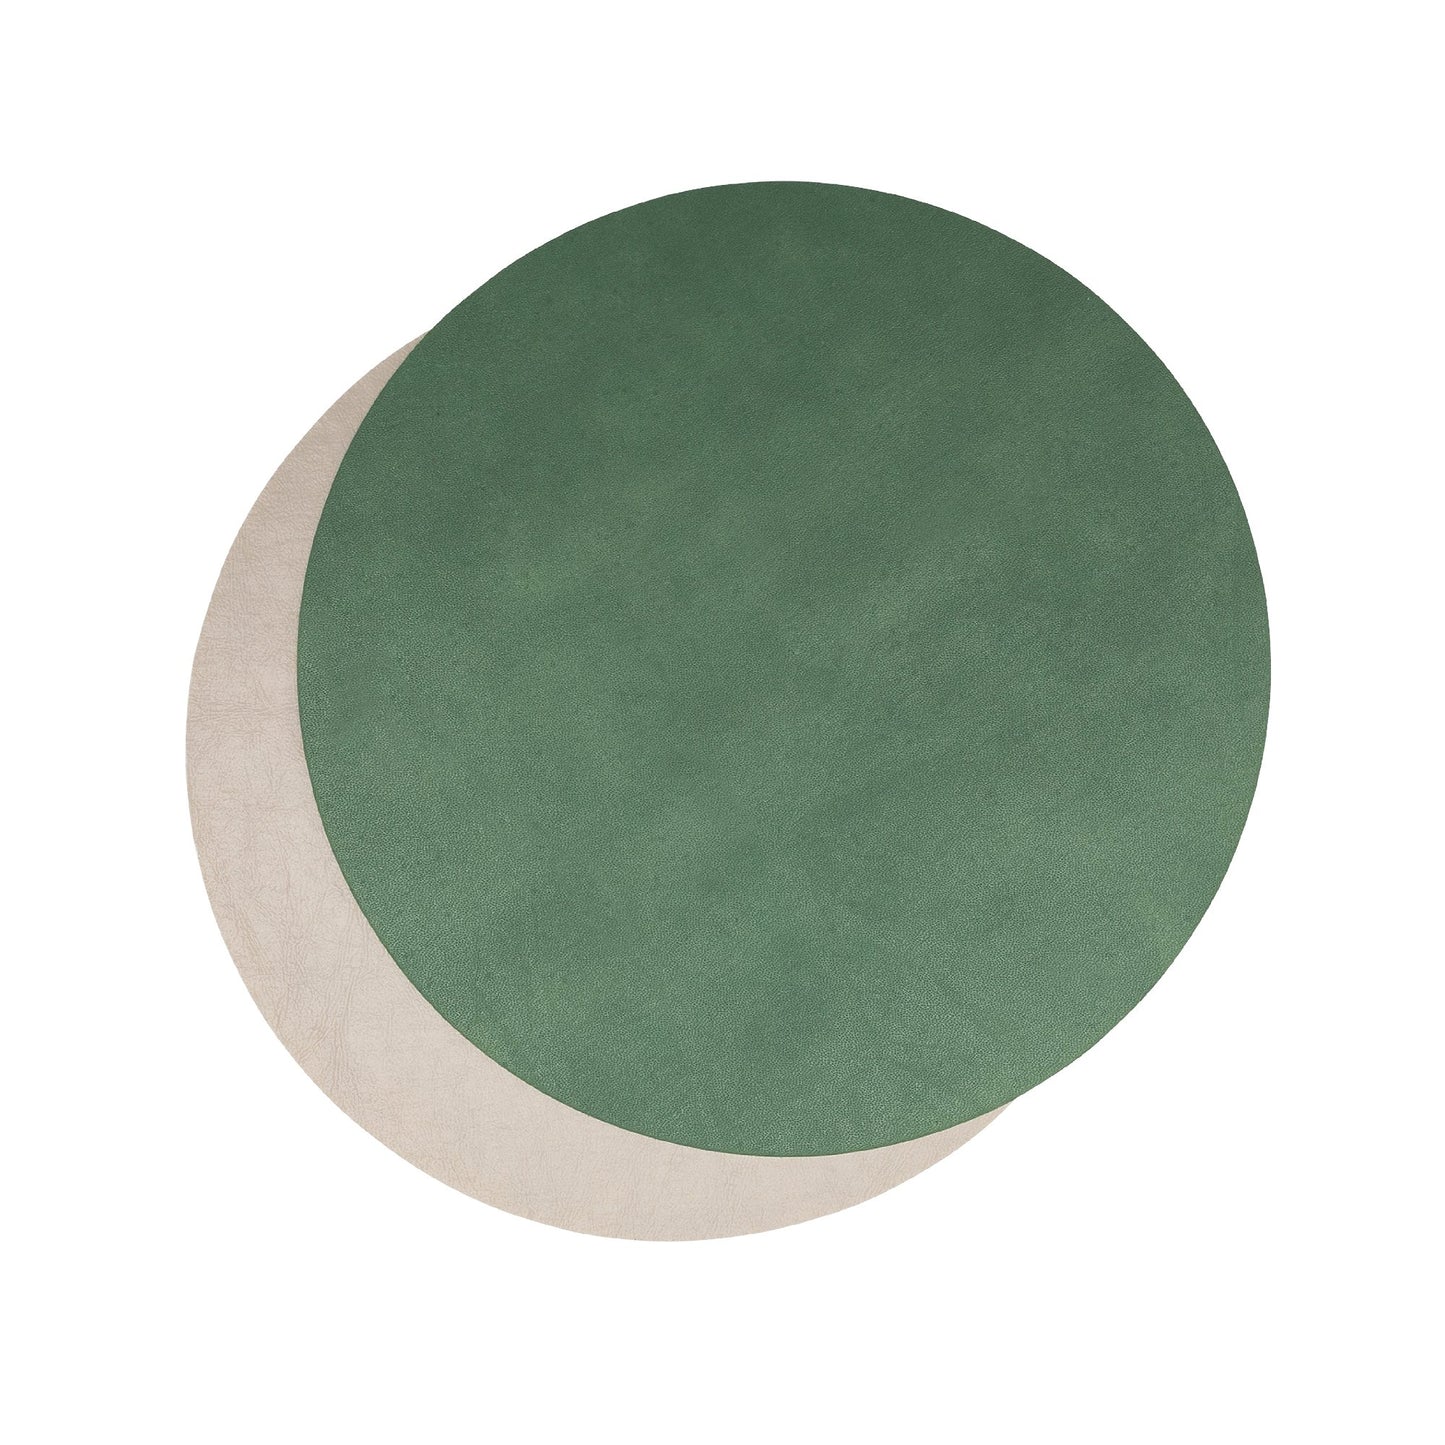 Two round washable paper placemats are shown one on top of the other. The one in the foreground is green and the one at rear is beige.